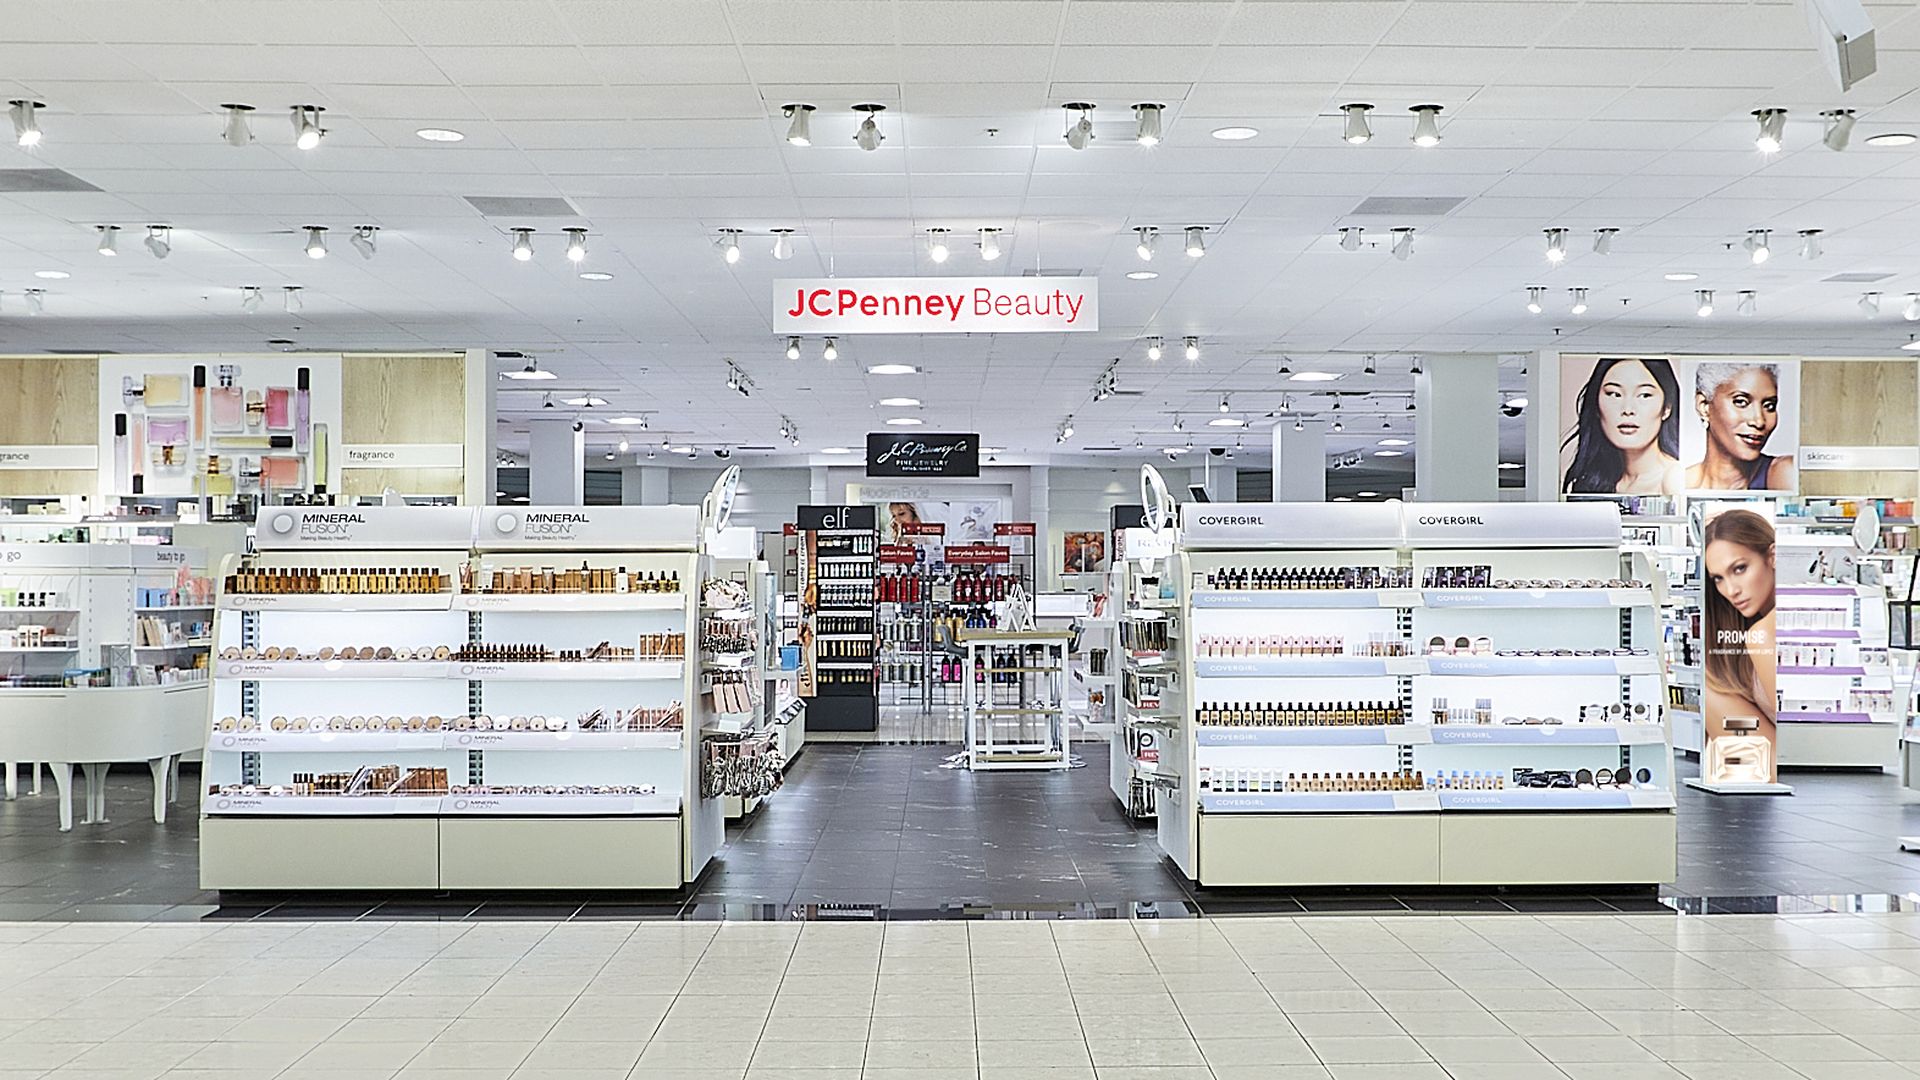 Department store JCPenney's new beauty section in its stores includes bright lighting and white fixtures under a sign that says JCPenney Beauty, spelled out in red lettering.